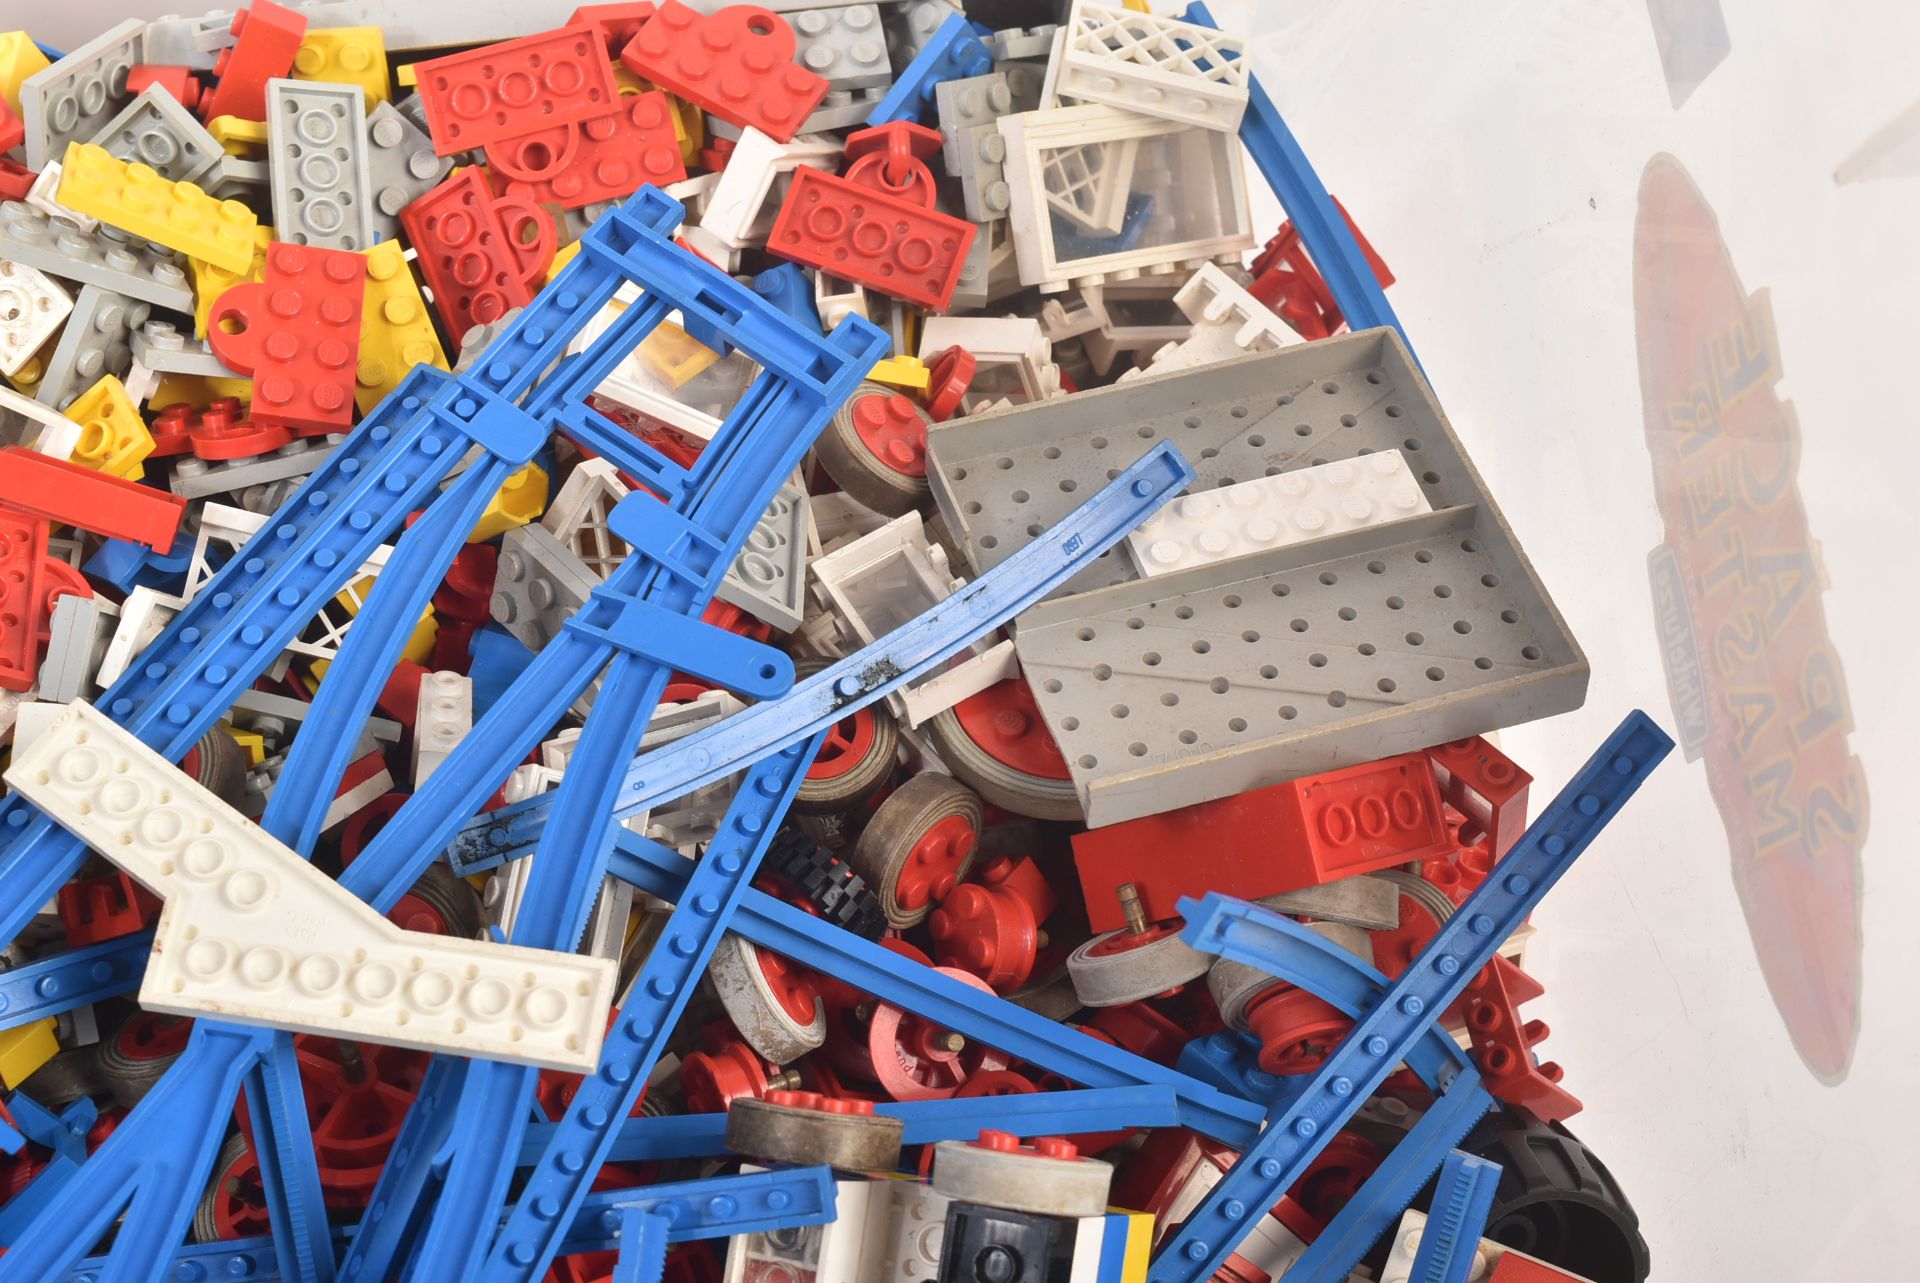 LARGE COLLECTION OF VINTAGE LOOSE LEGO BRICKS - Image 4 of 6